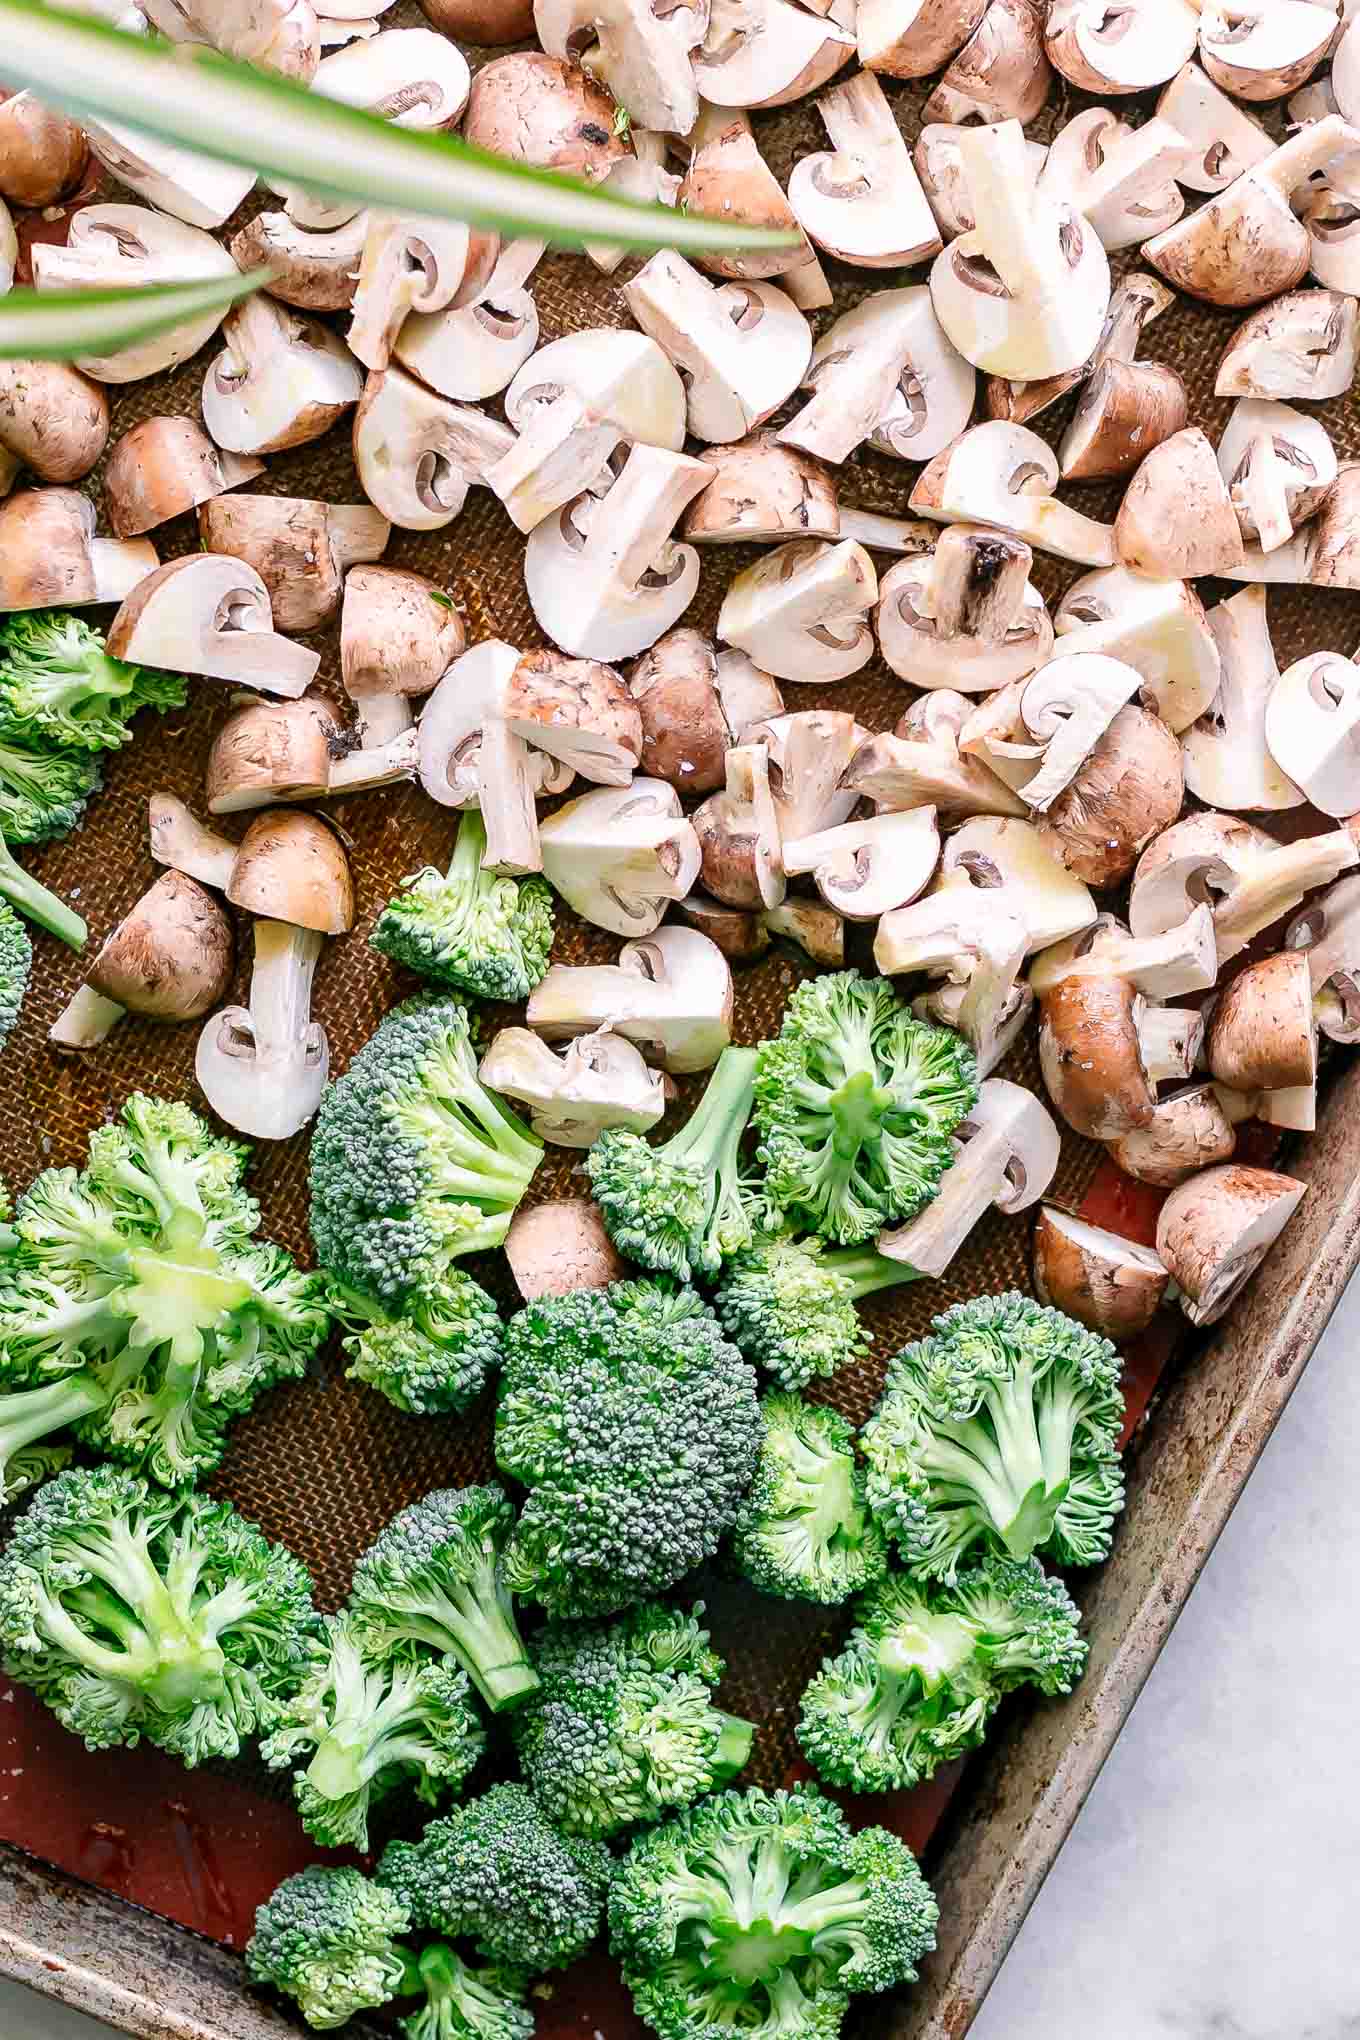 cut broccoli florets and sliced mushrooms on a baking sheet before roasting